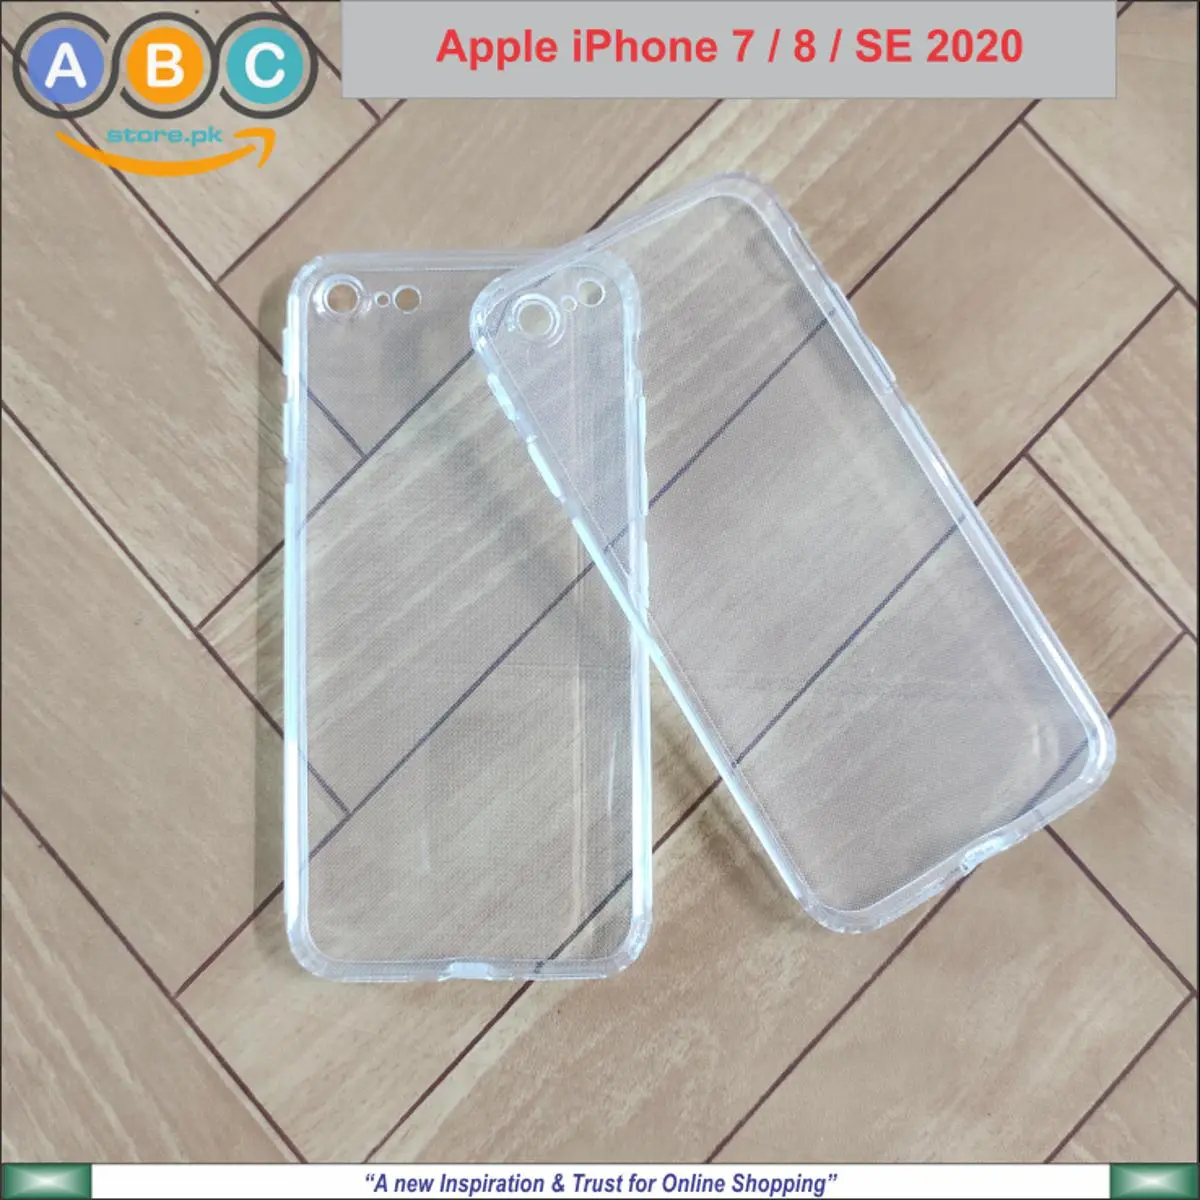 Apple iPhone 7/8/SE 2020 Case, Soft TPU Ultra-Clear with Dust Plugs (NO Corner Bumpers) Back Cover